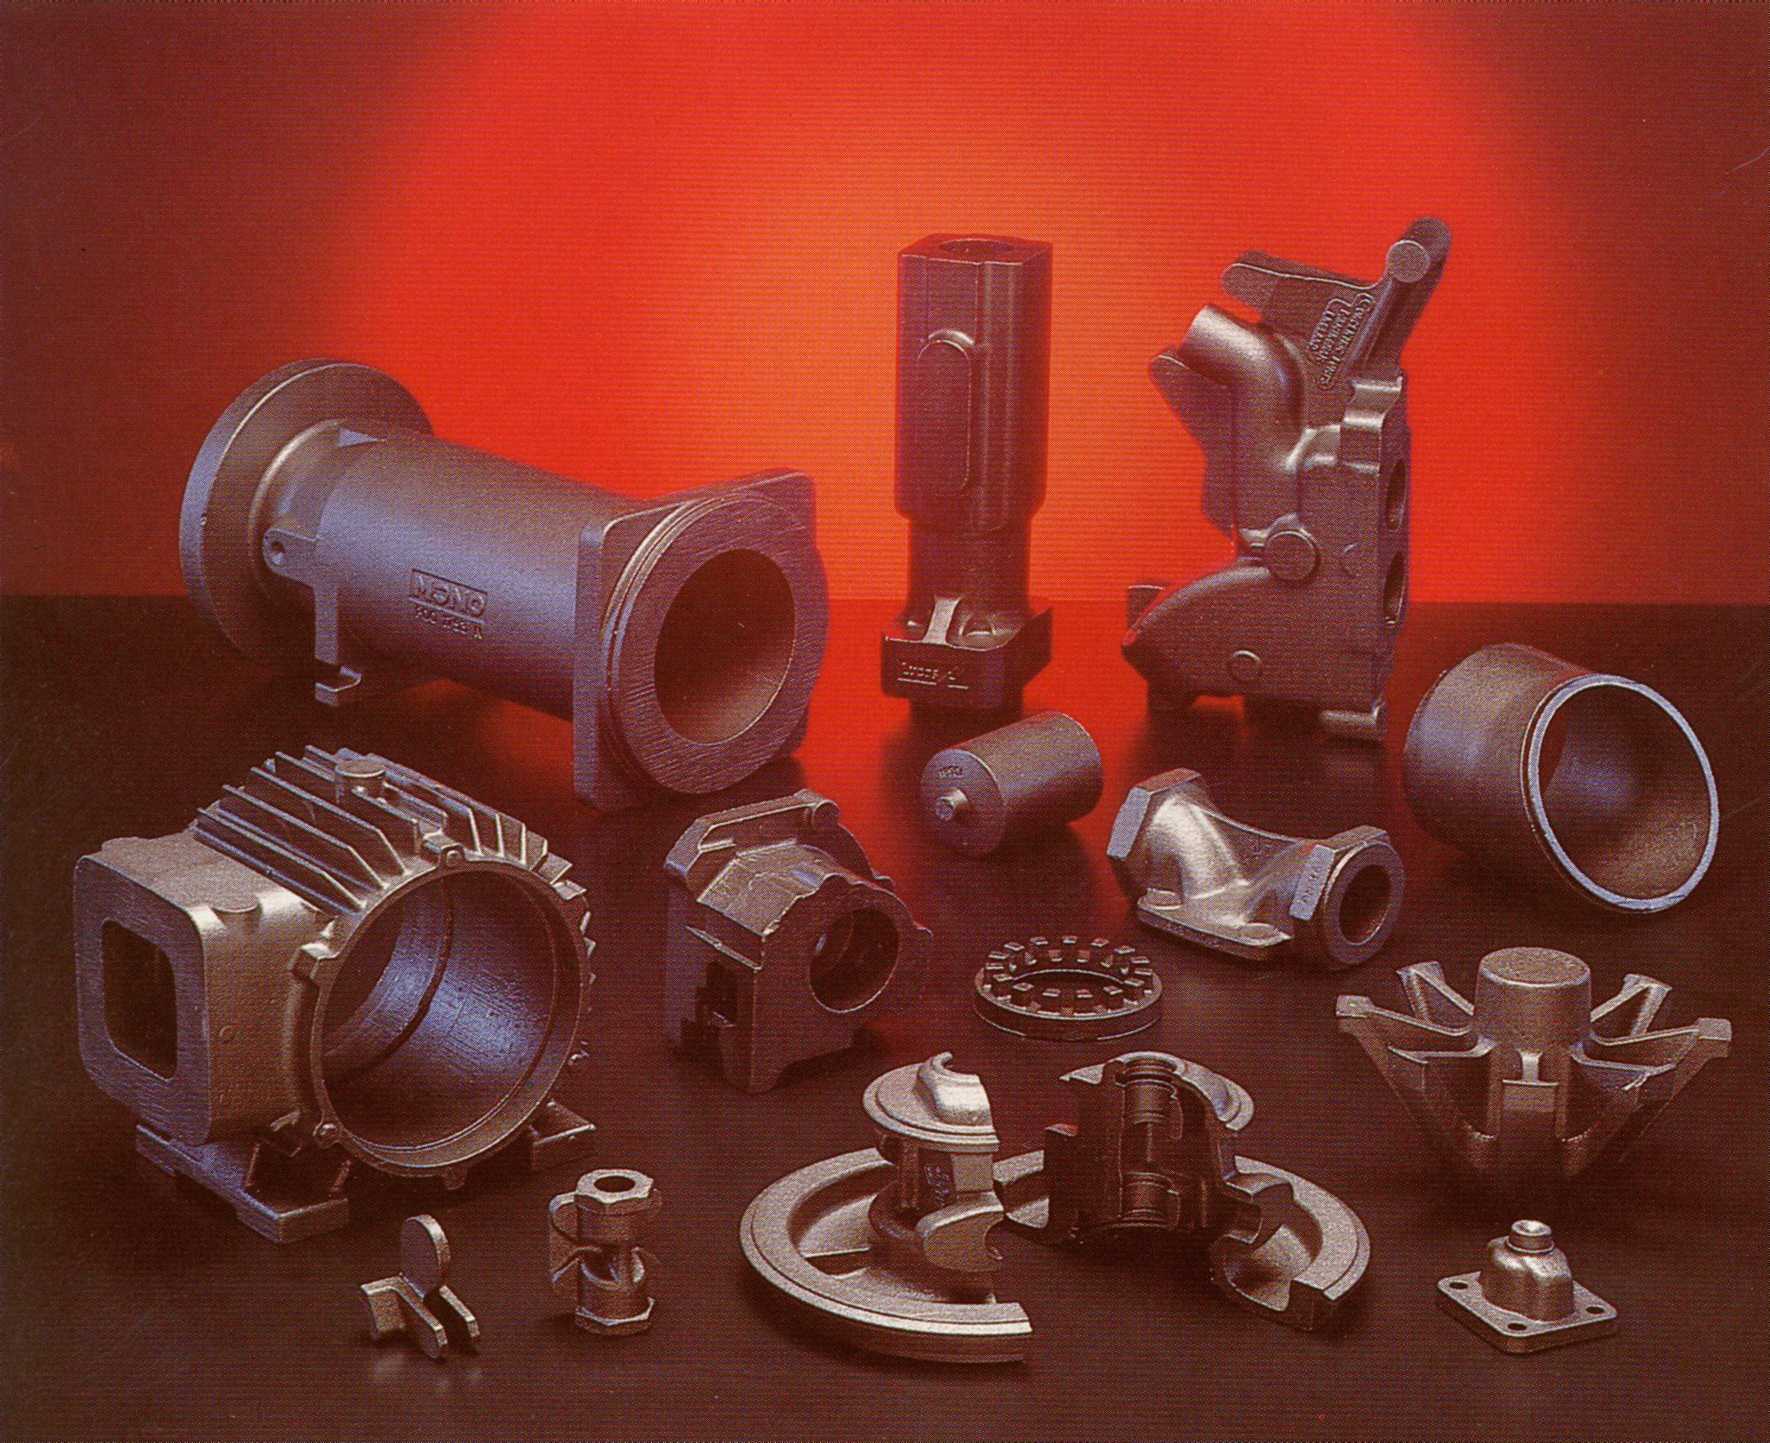 Newby Foundries produce castings for pumps, valves, hydraulic parts and turbochargers.